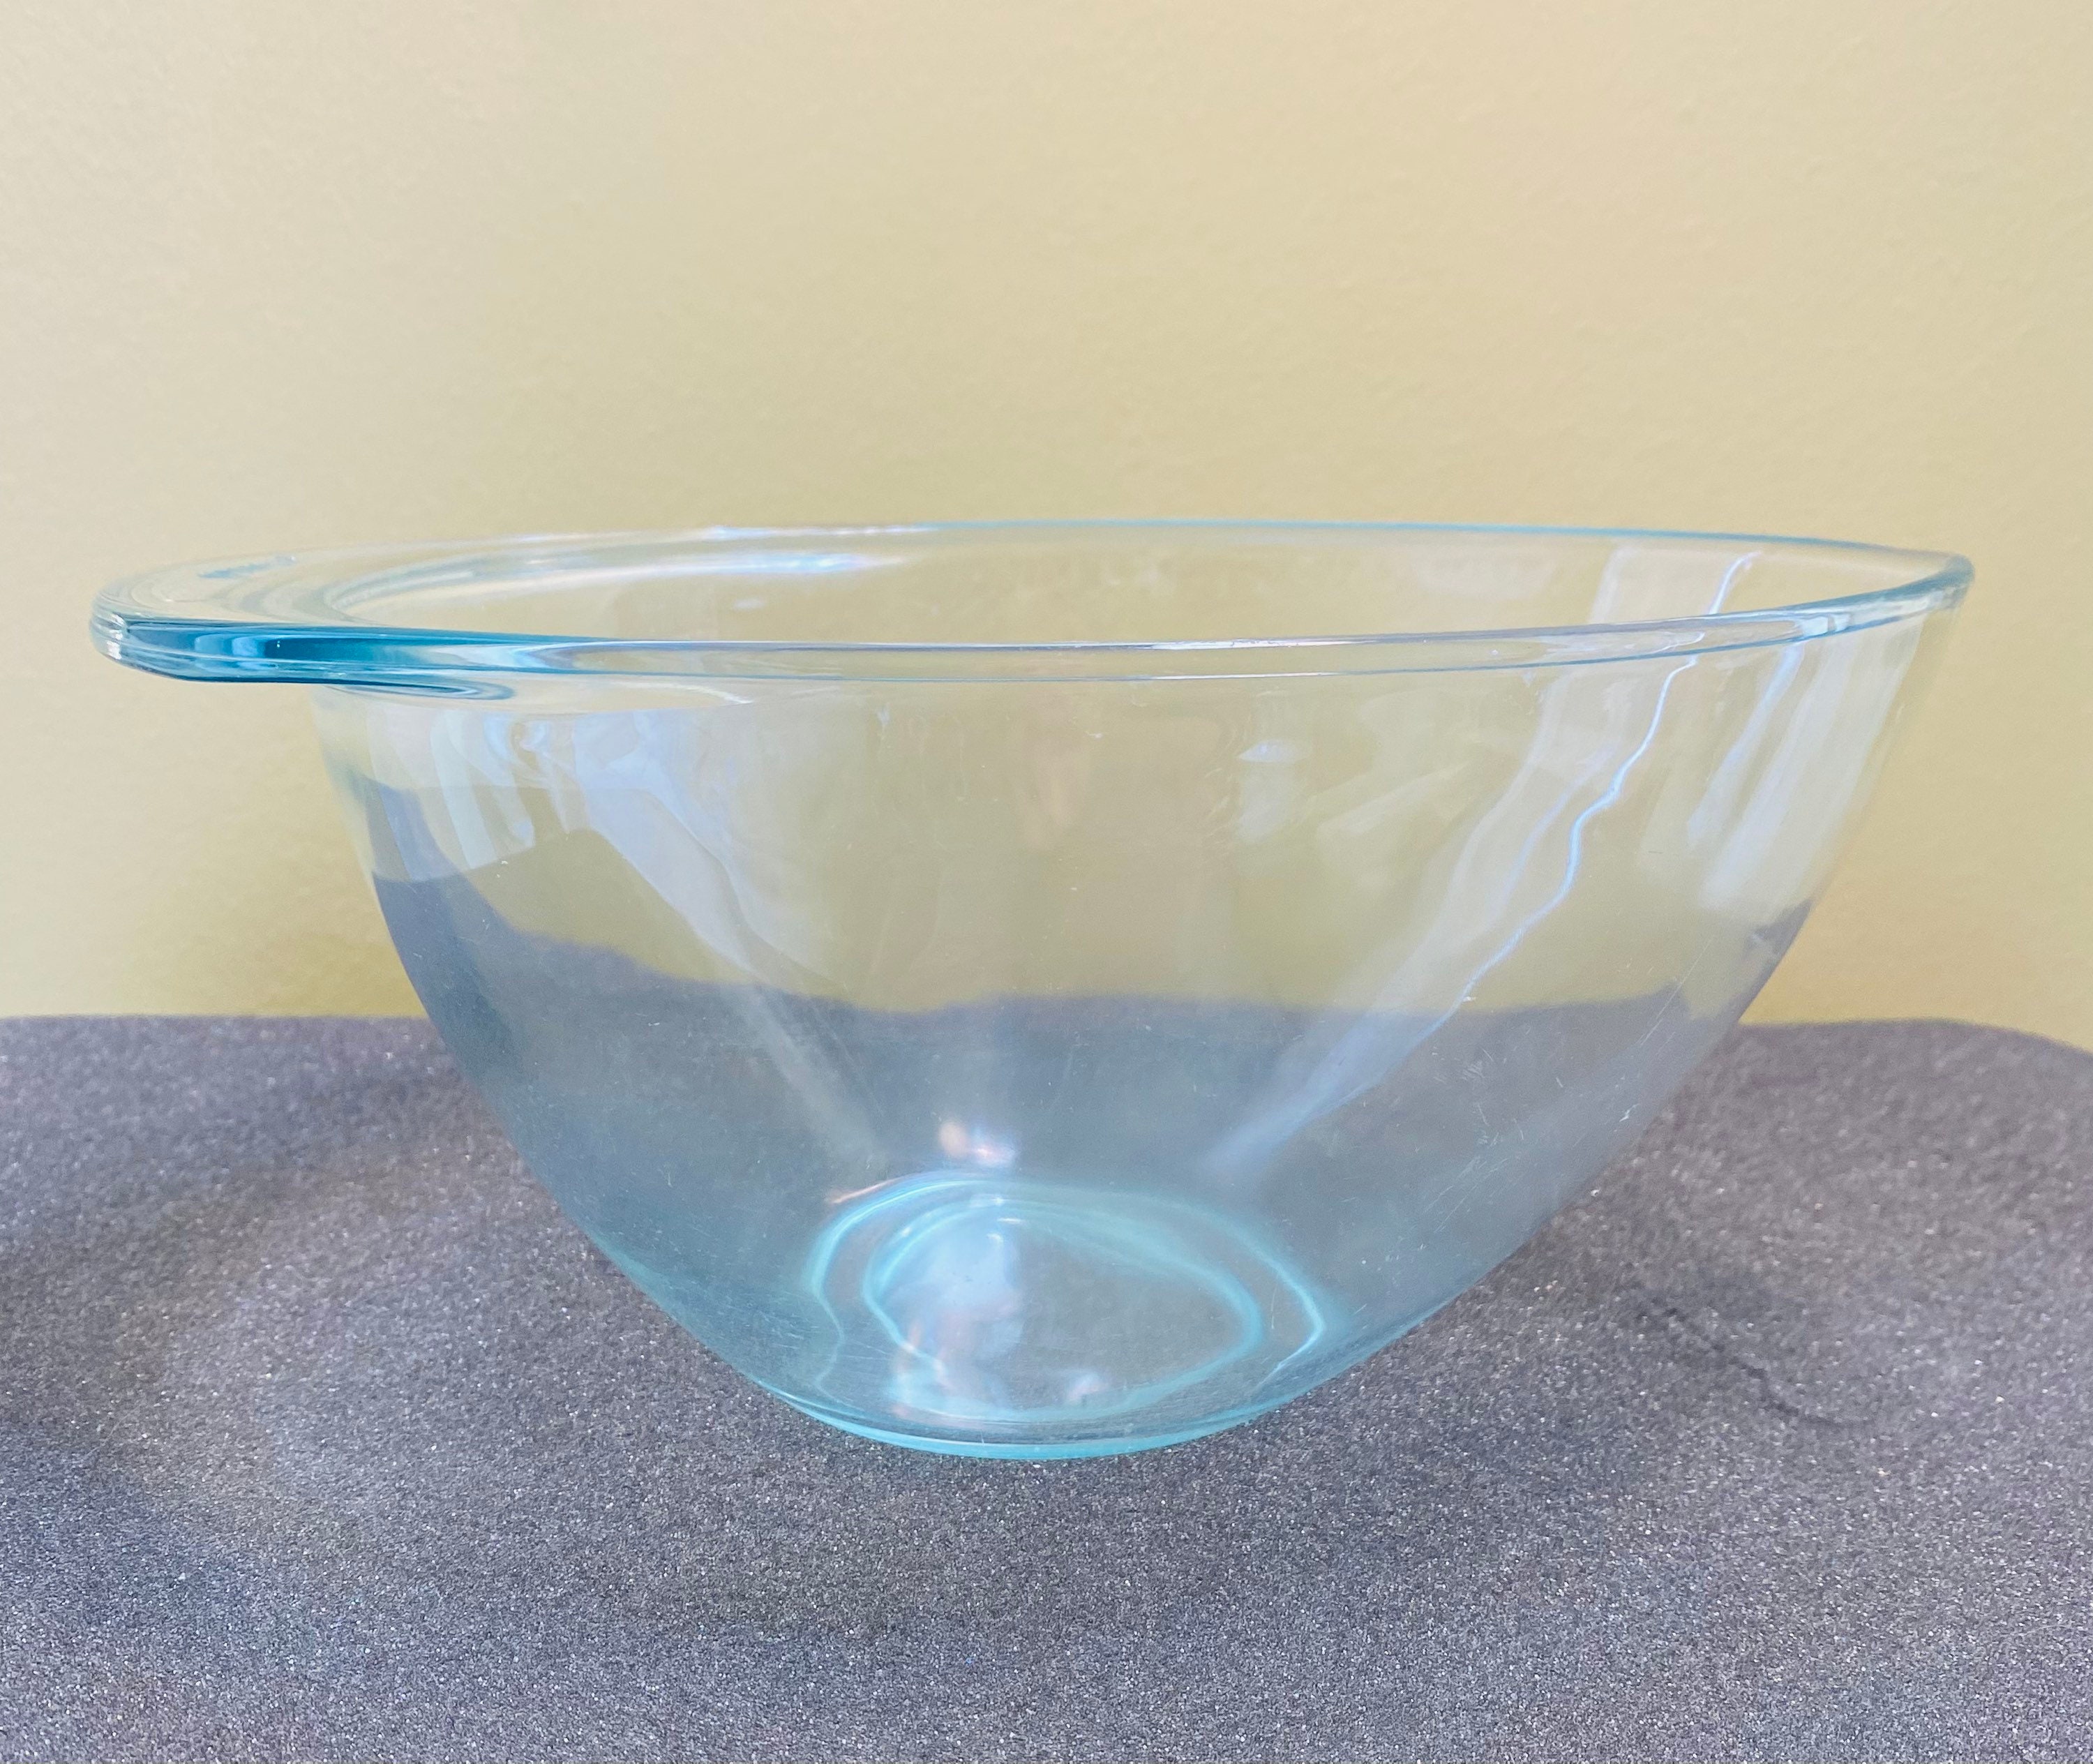 Sold at Auction: Large Pampered Chef Batter Mixing Bowl With Pour Spout